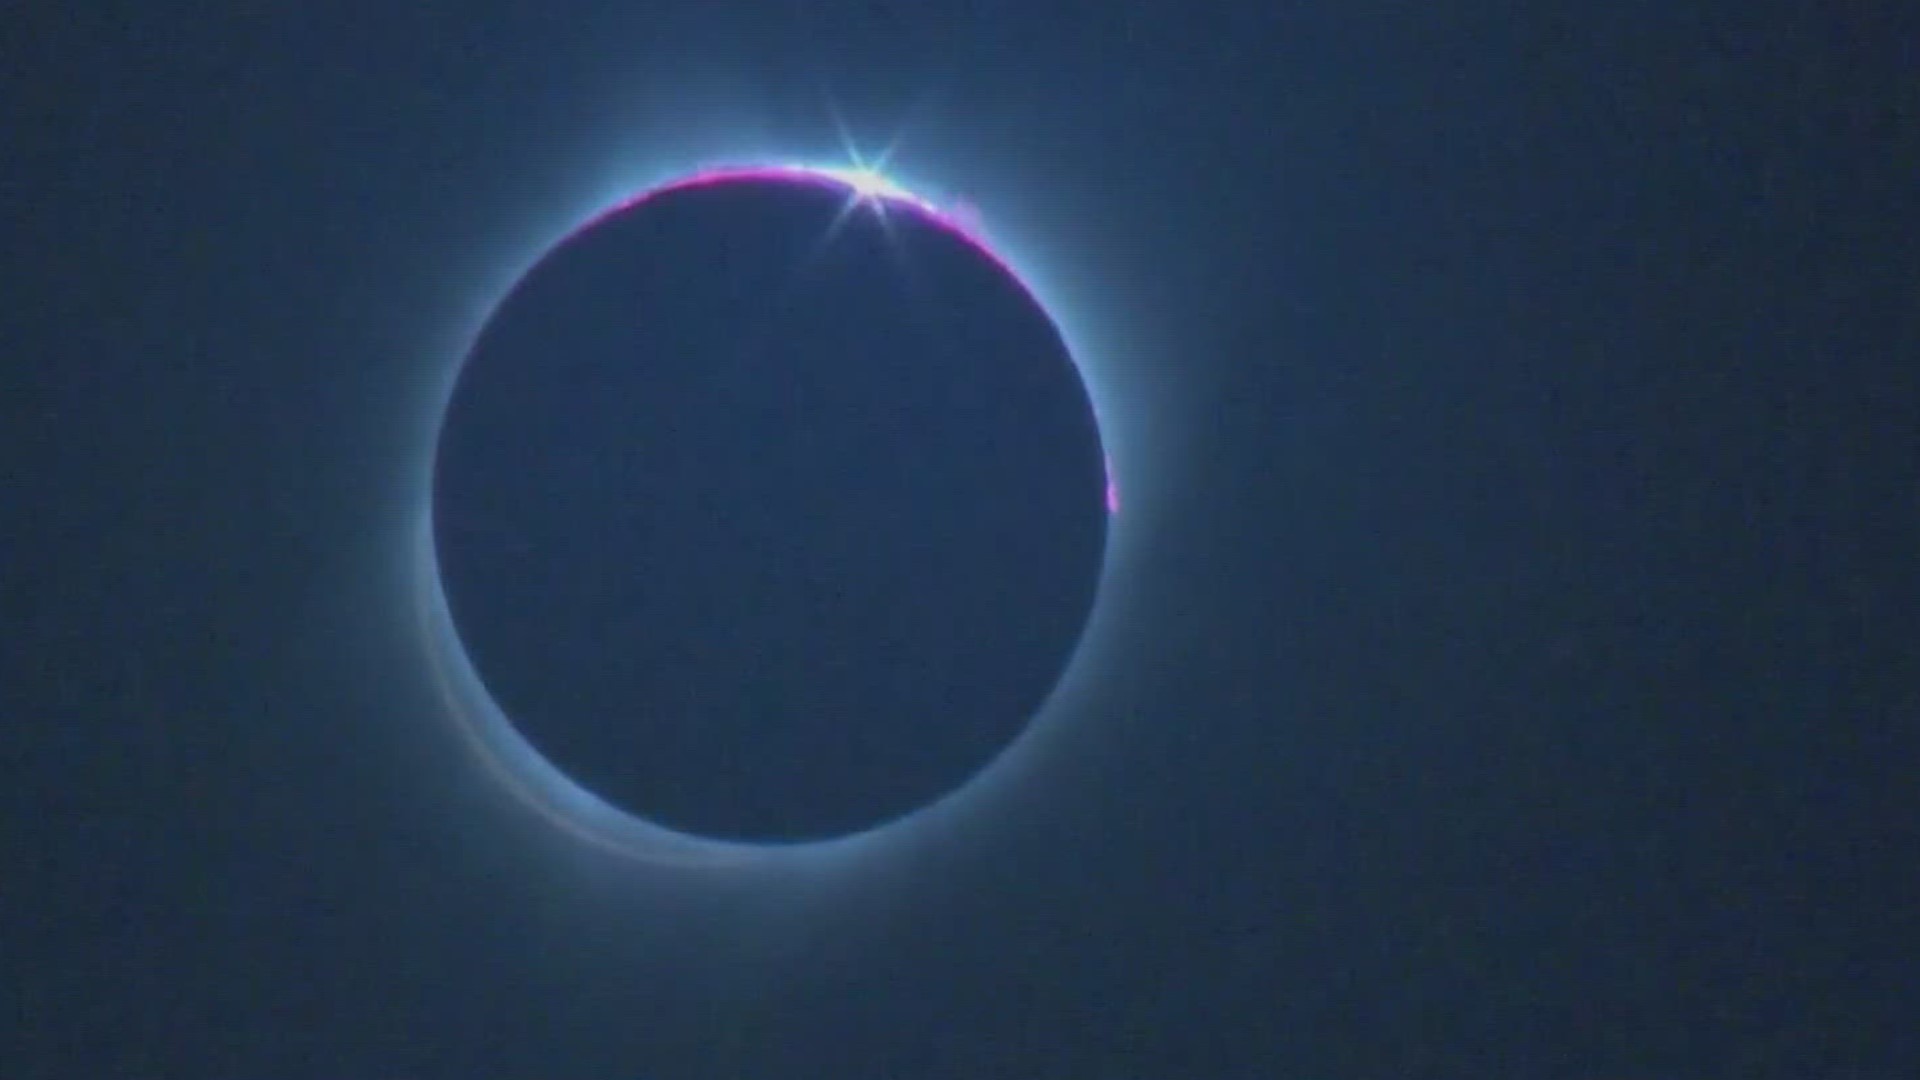 Annular solar eclipse in Oct. 2023 Where to watch in Oregon